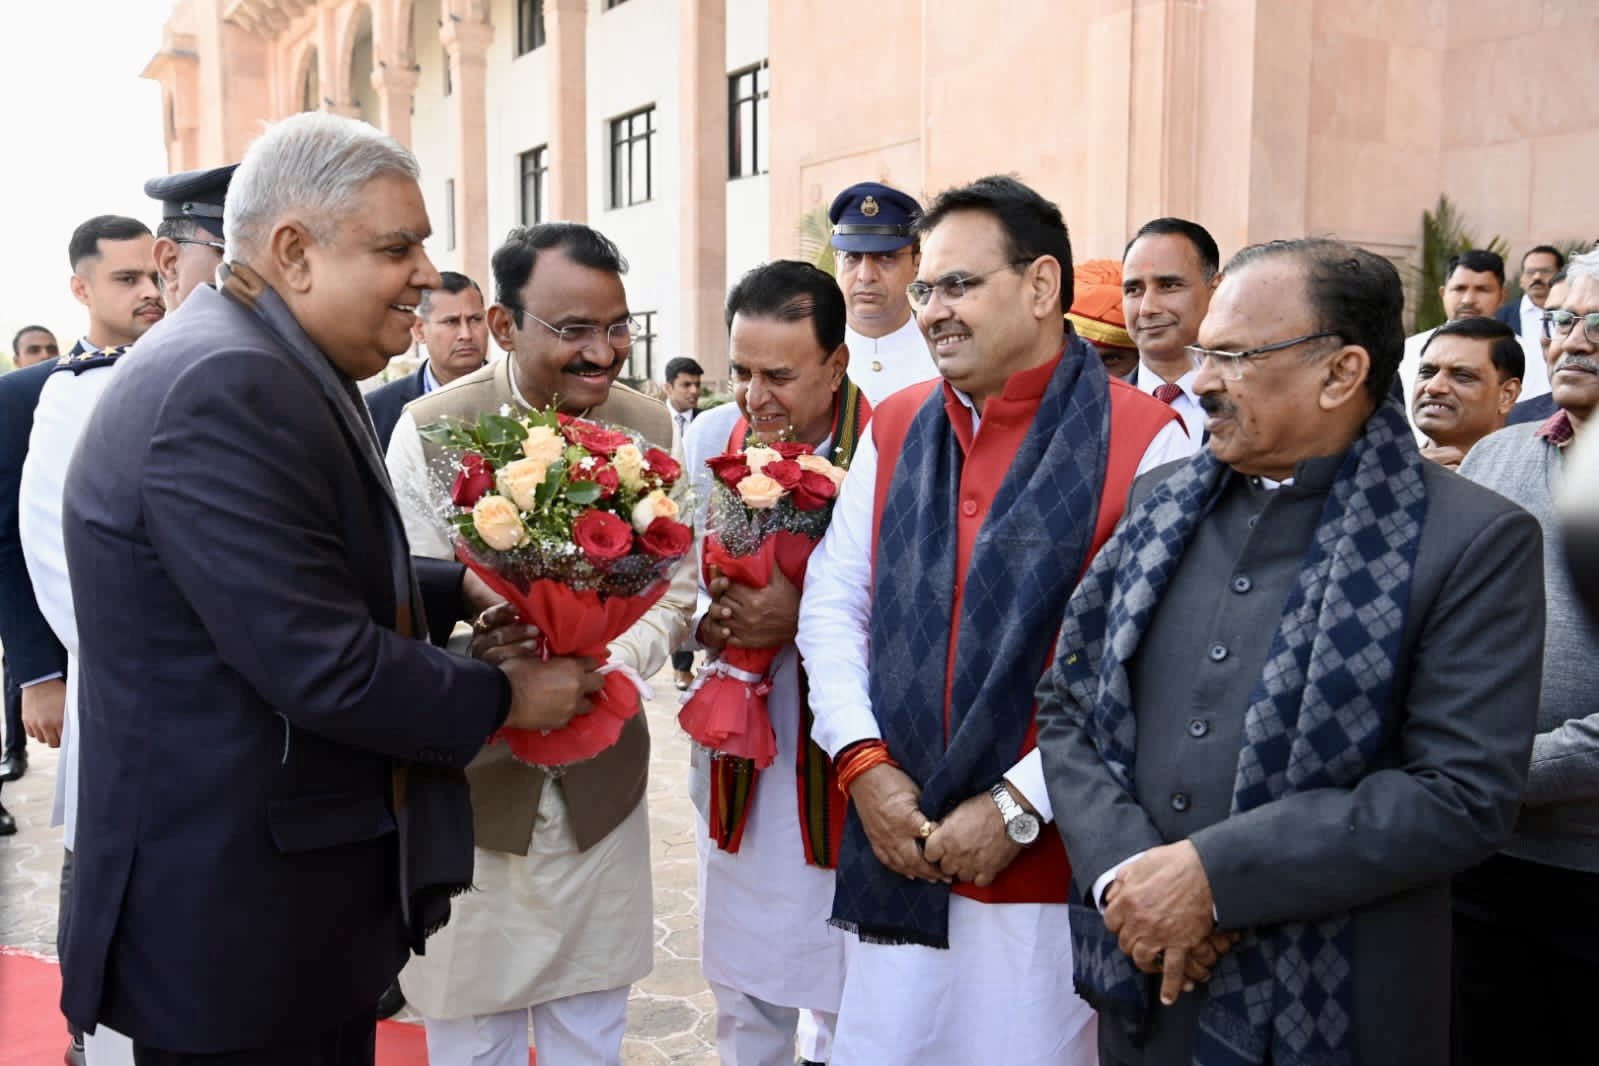 The Vice-President, Shri Jagdeep Dhankhar being welcomed by the Speaker of Rajasthan Assembly Shri Vasudev Devnani, Chief Minister, Shri Bhajanlal Sharma, Deputy Chief Minister, Shri Premchand Bairwa and other dignitaries on his arrival at Rajasthan Legislative Assembly in Jaipur, Rajasthan on January 16, 2024.